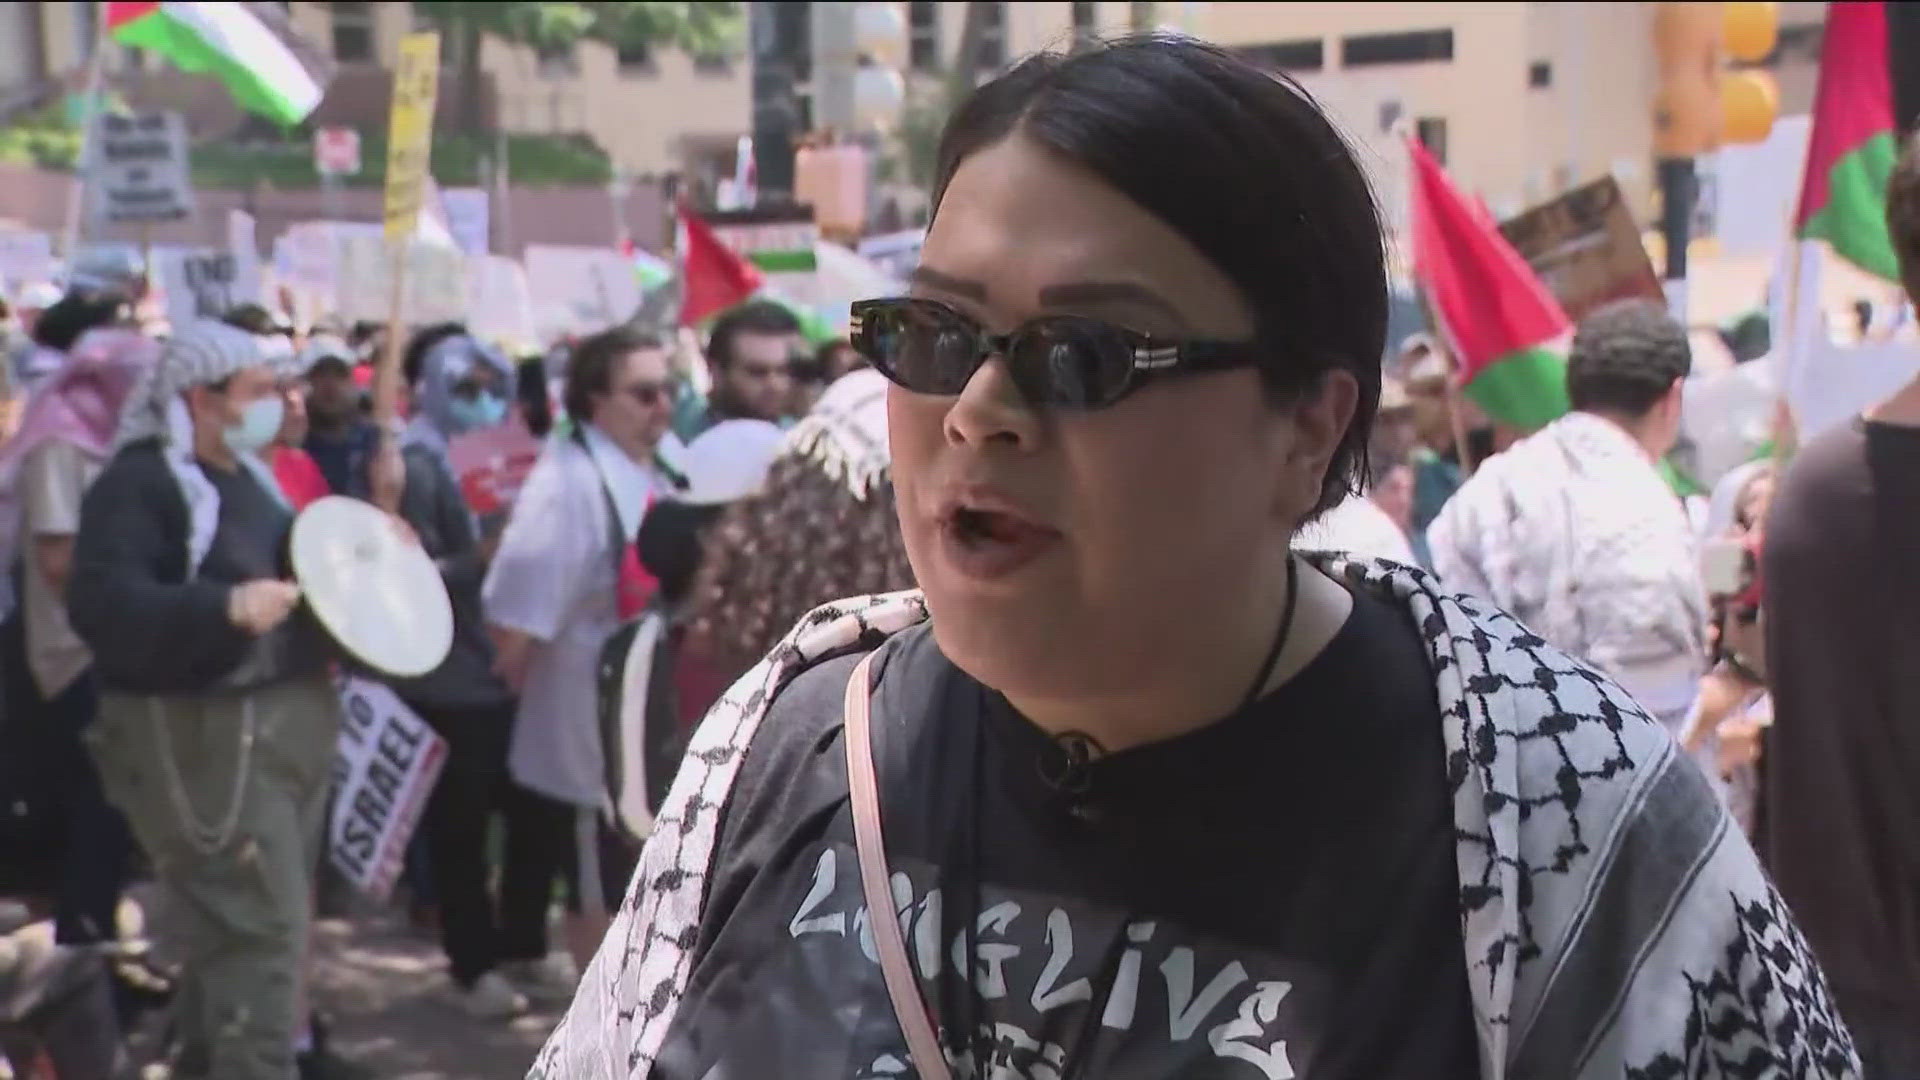 A demonstration was held May 19 at the Texas State Capitol and across parts of the Austin metro area.